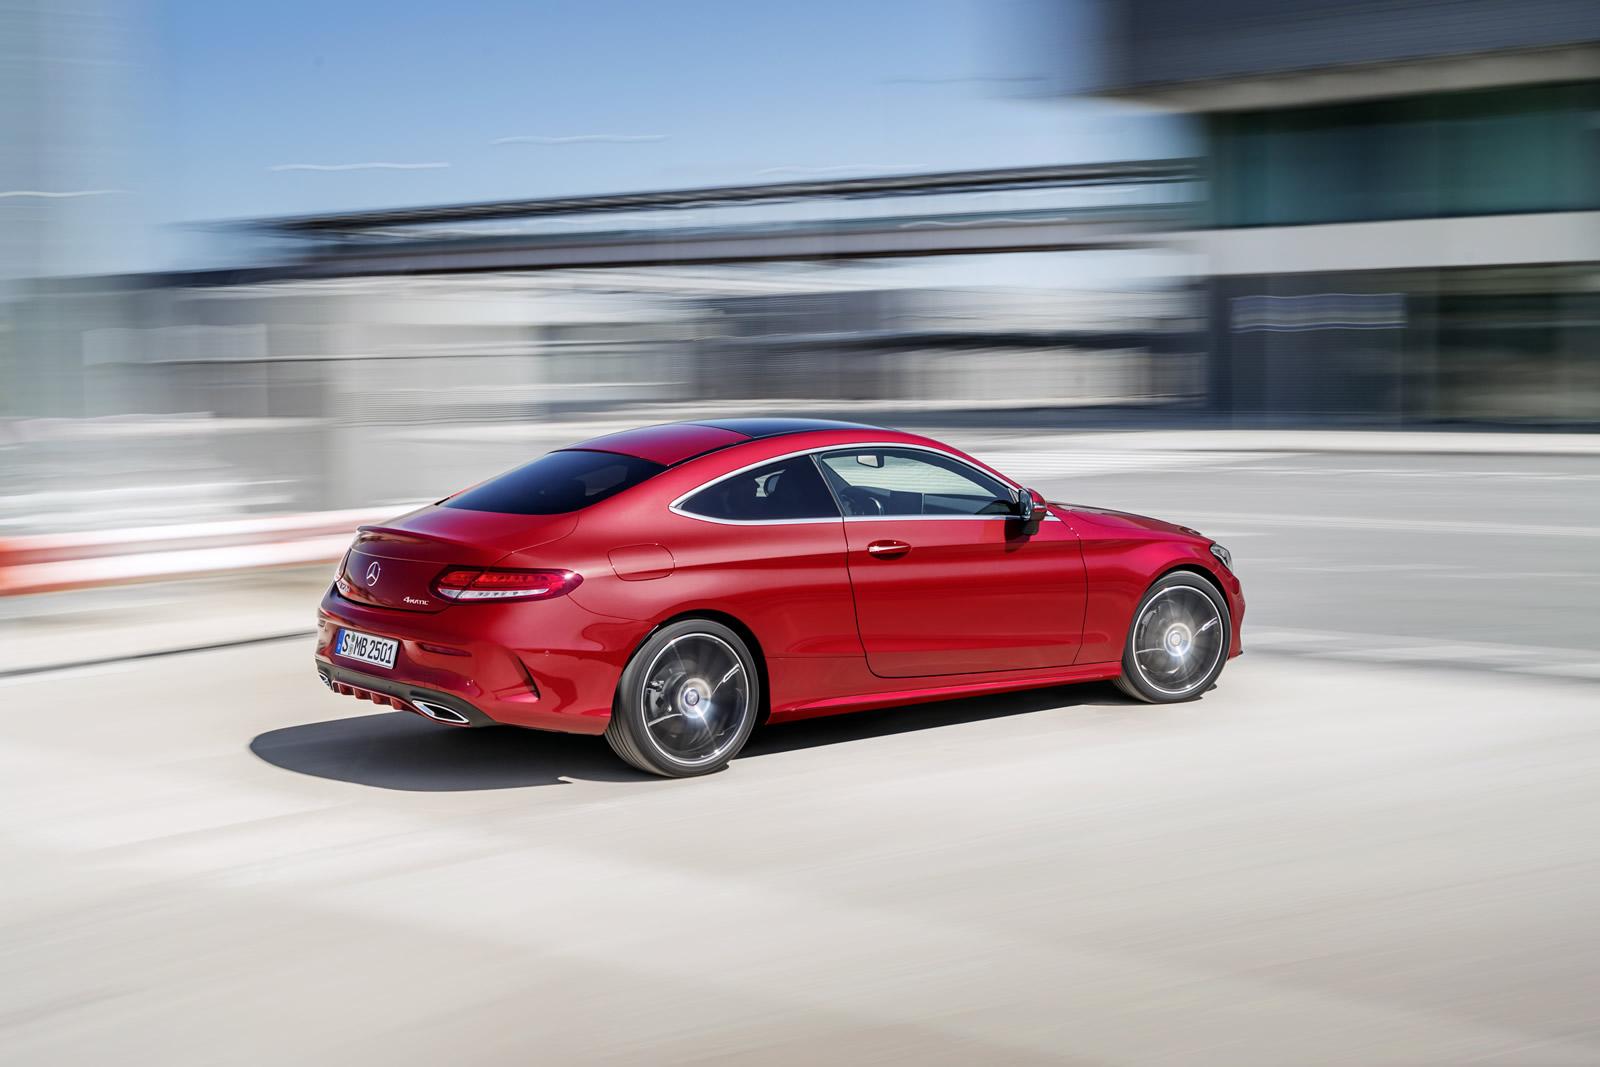 2016 MERCEDES C SERS COUPE RESM GALERS